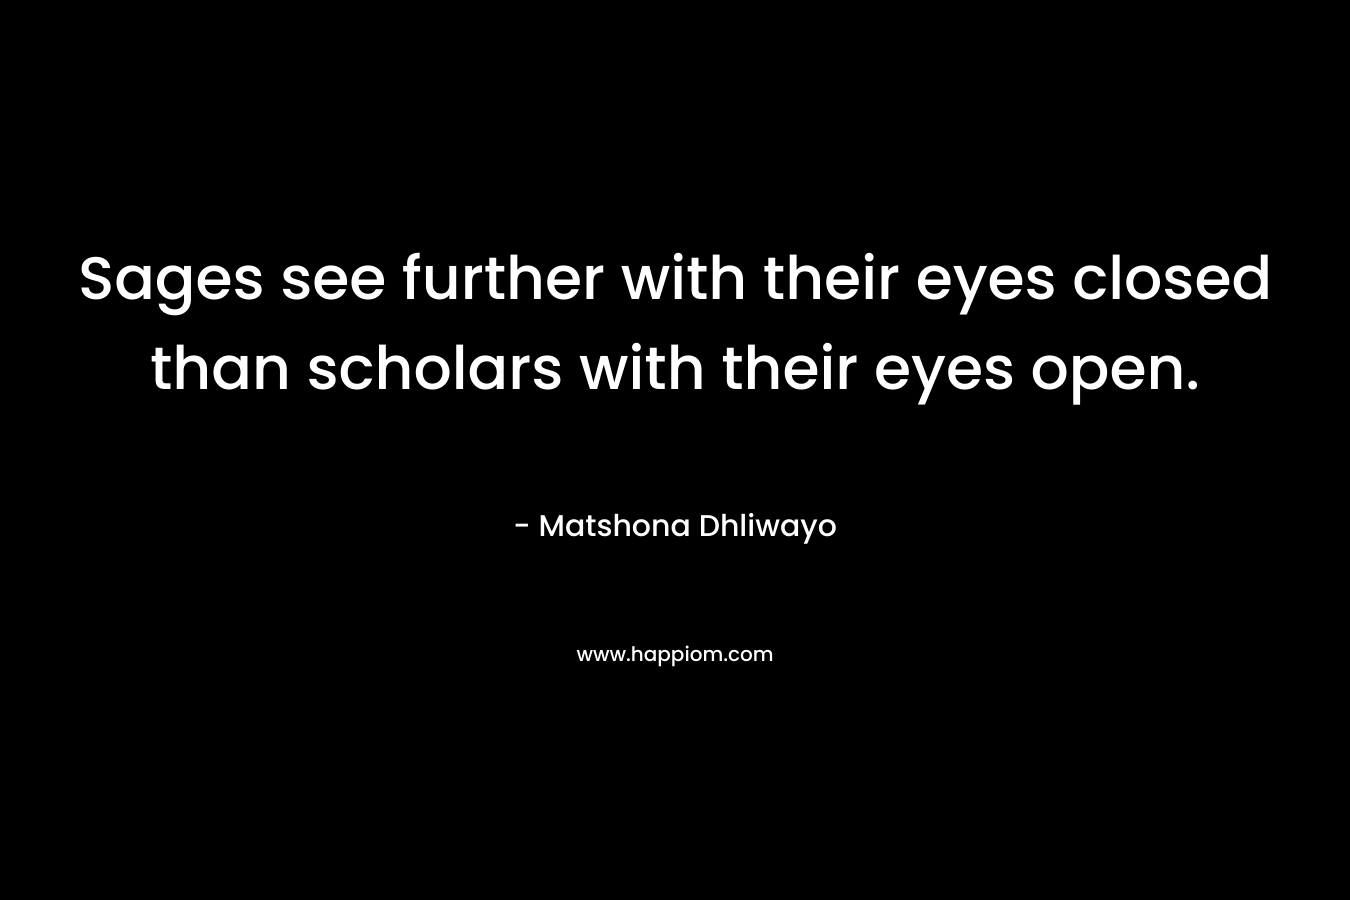 Sages see further with their eyes closed than scholars with their eyes open.